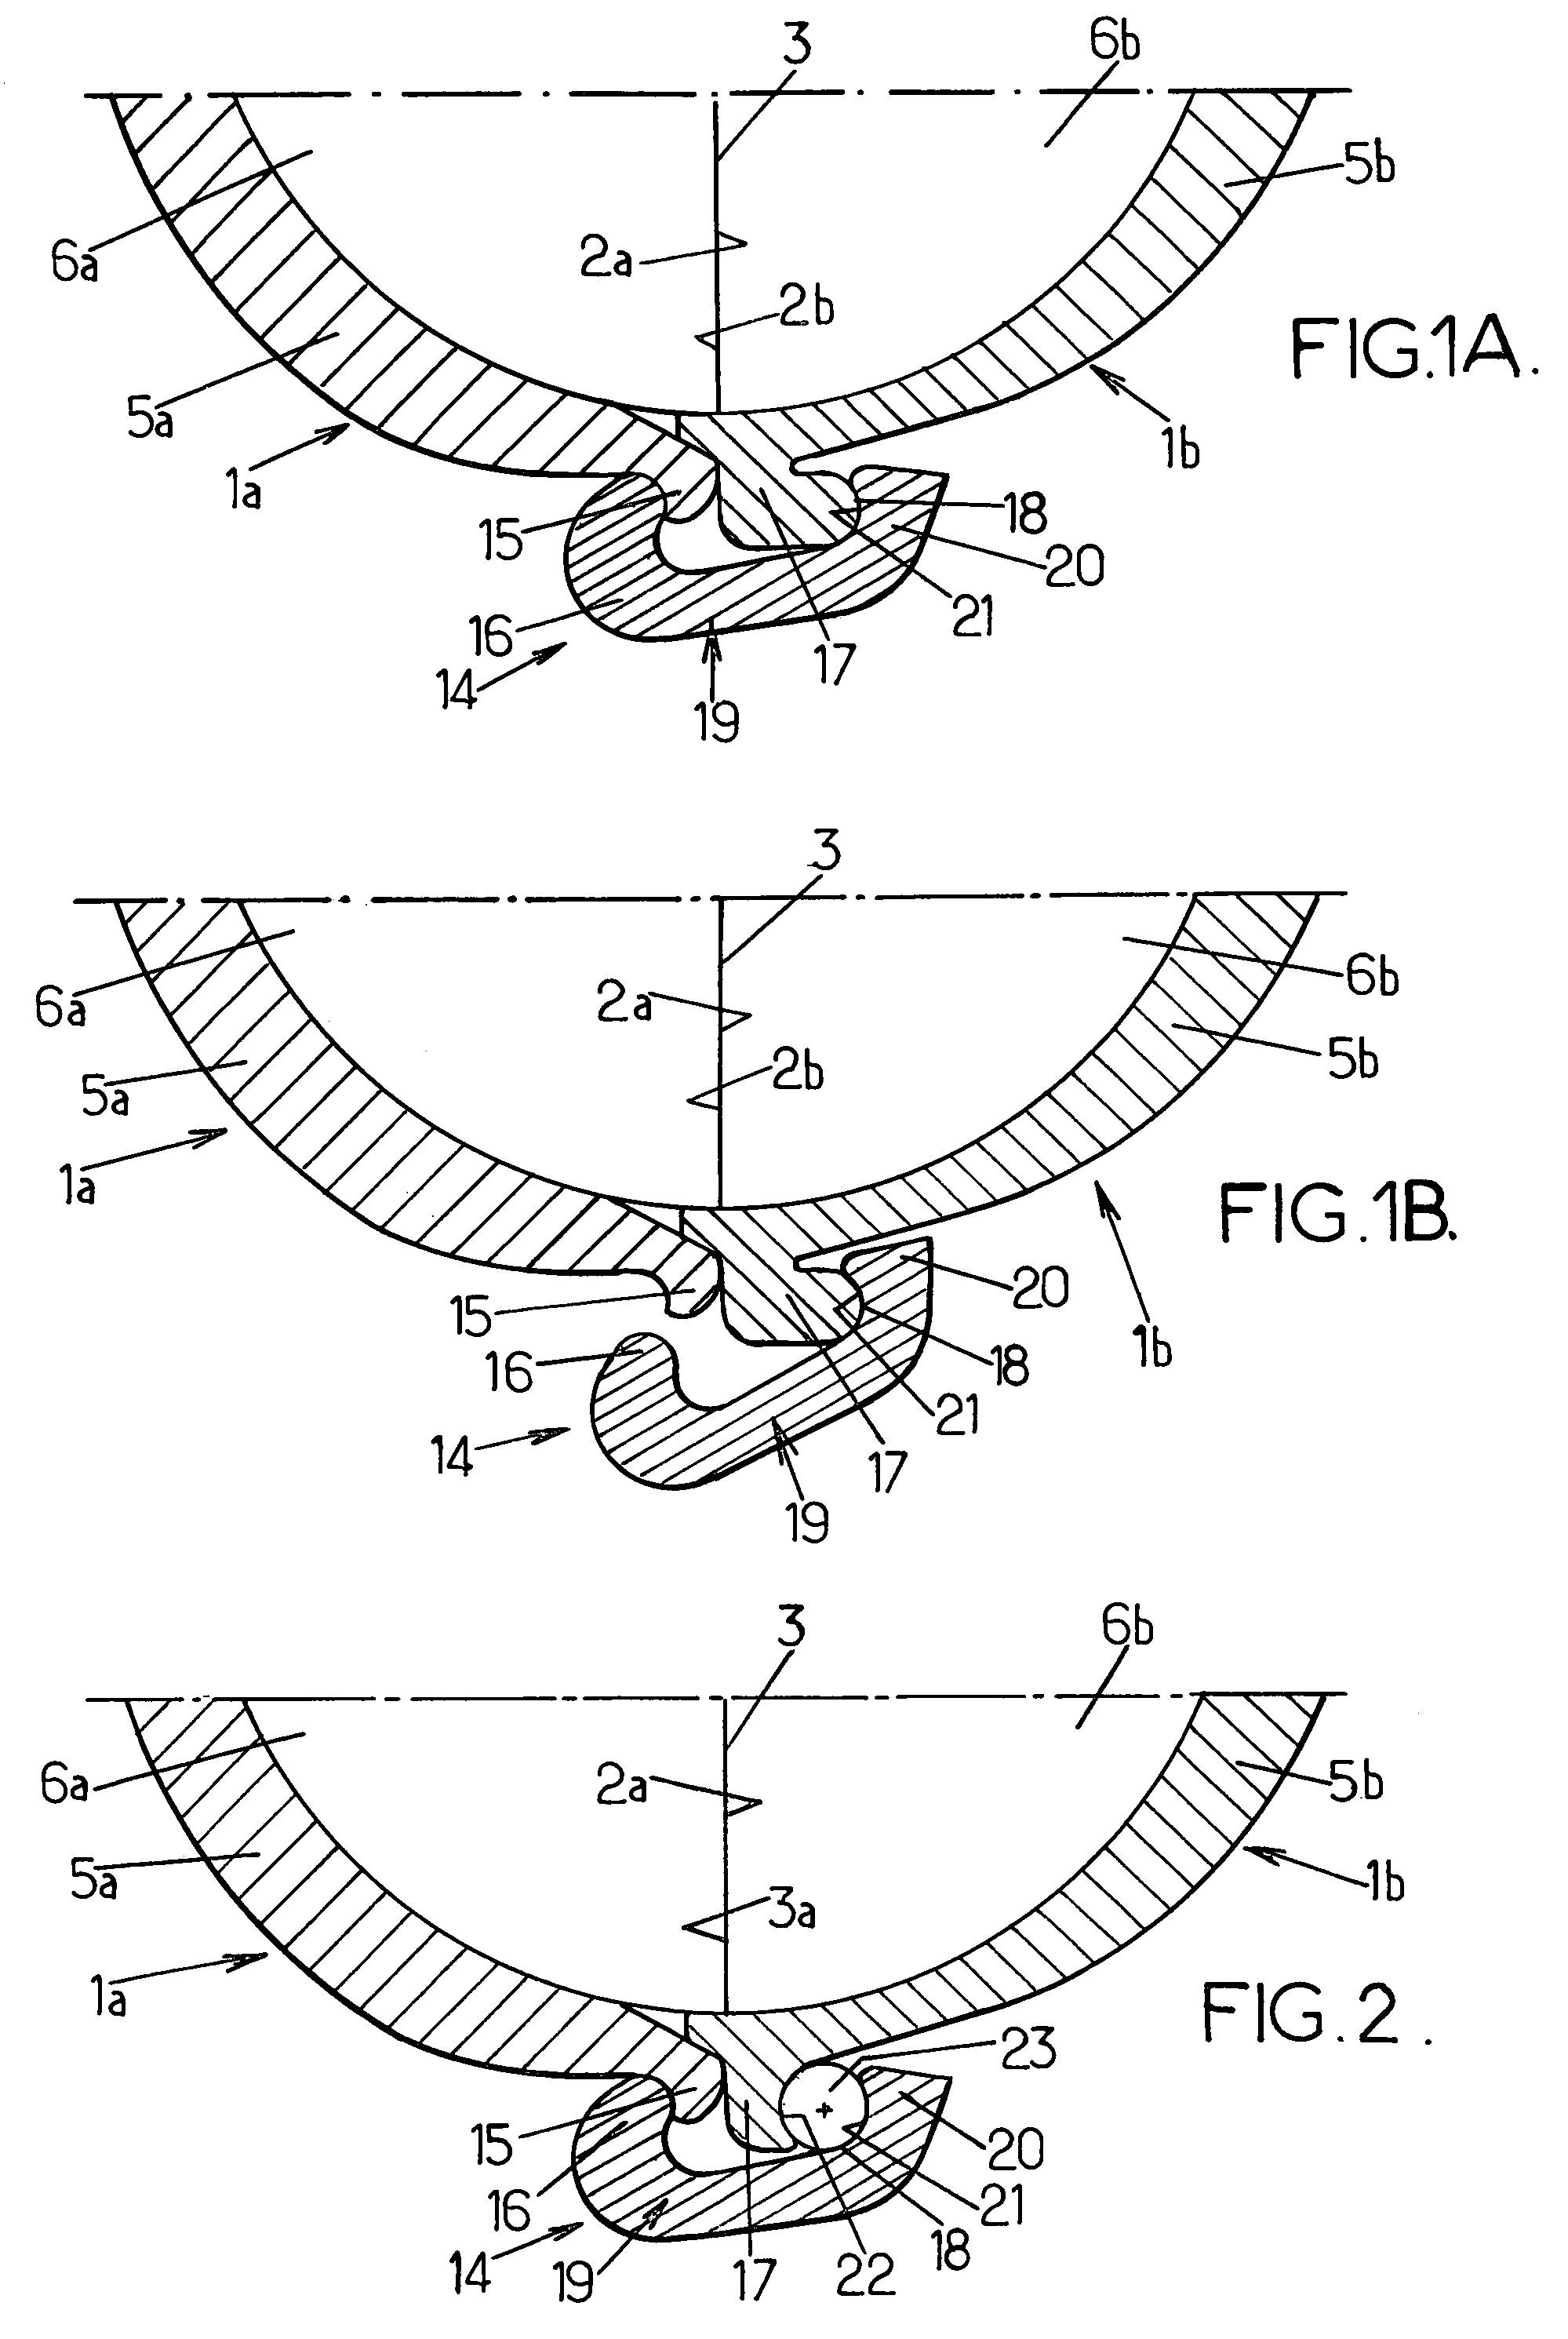 Moulding device for the production of containers in thermoplastic material